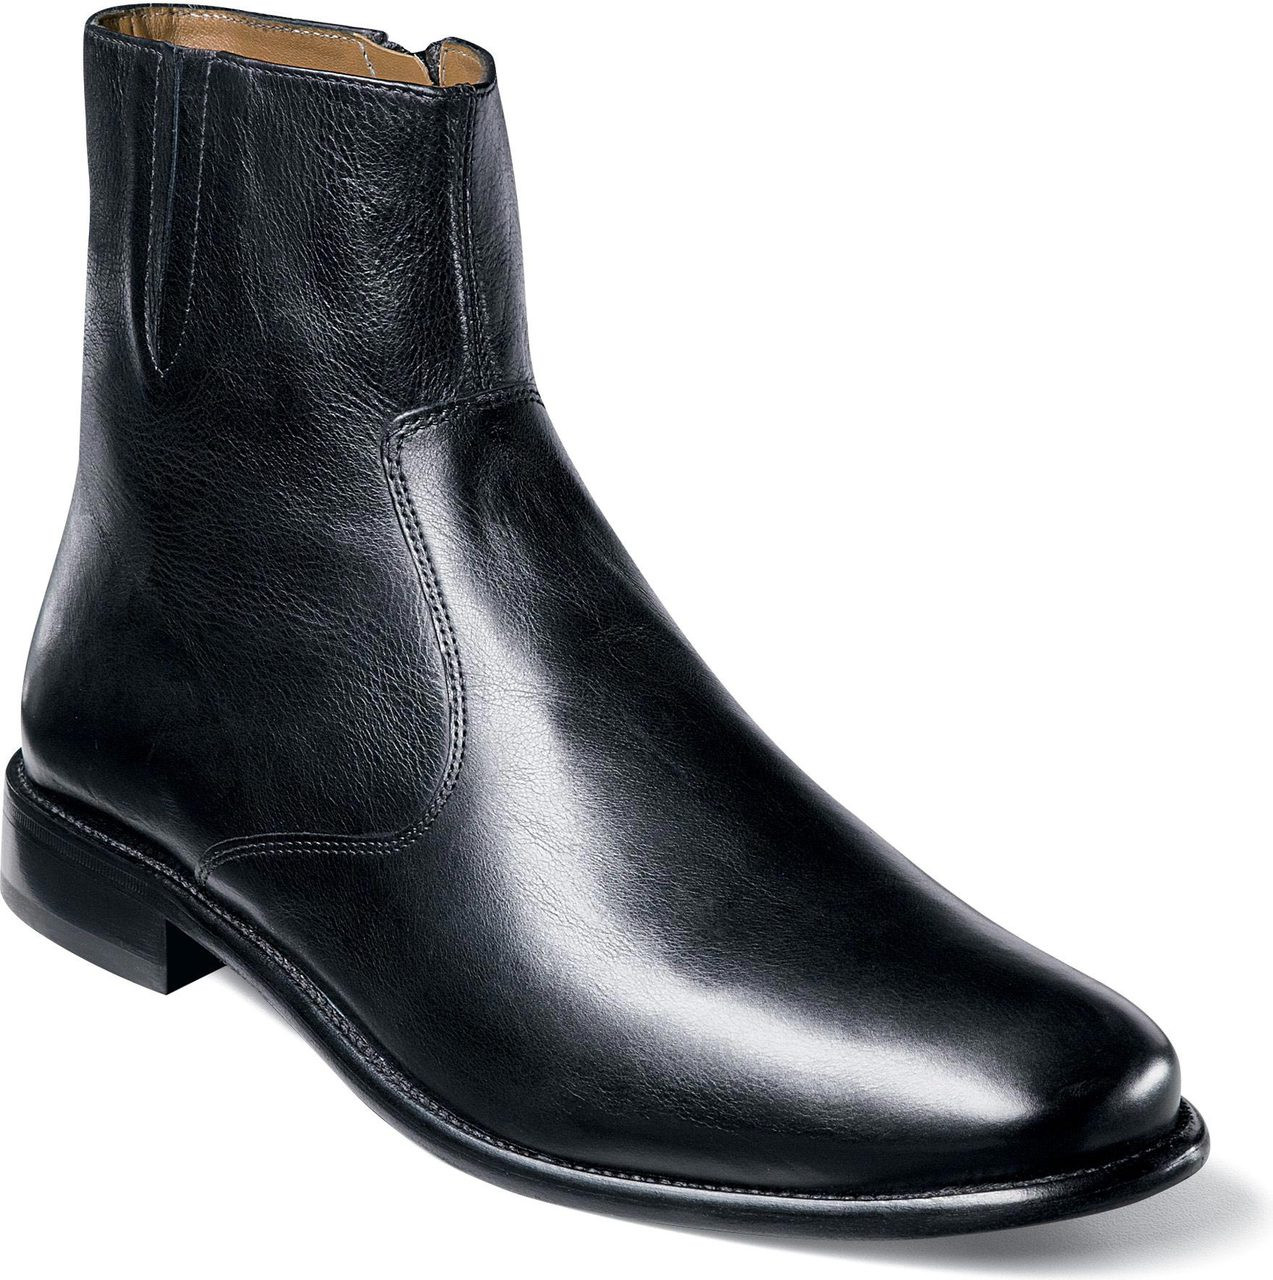 Florsheim Hugo - FREE Shipping & FREE Returns - Ankle Boots, Dress Boots